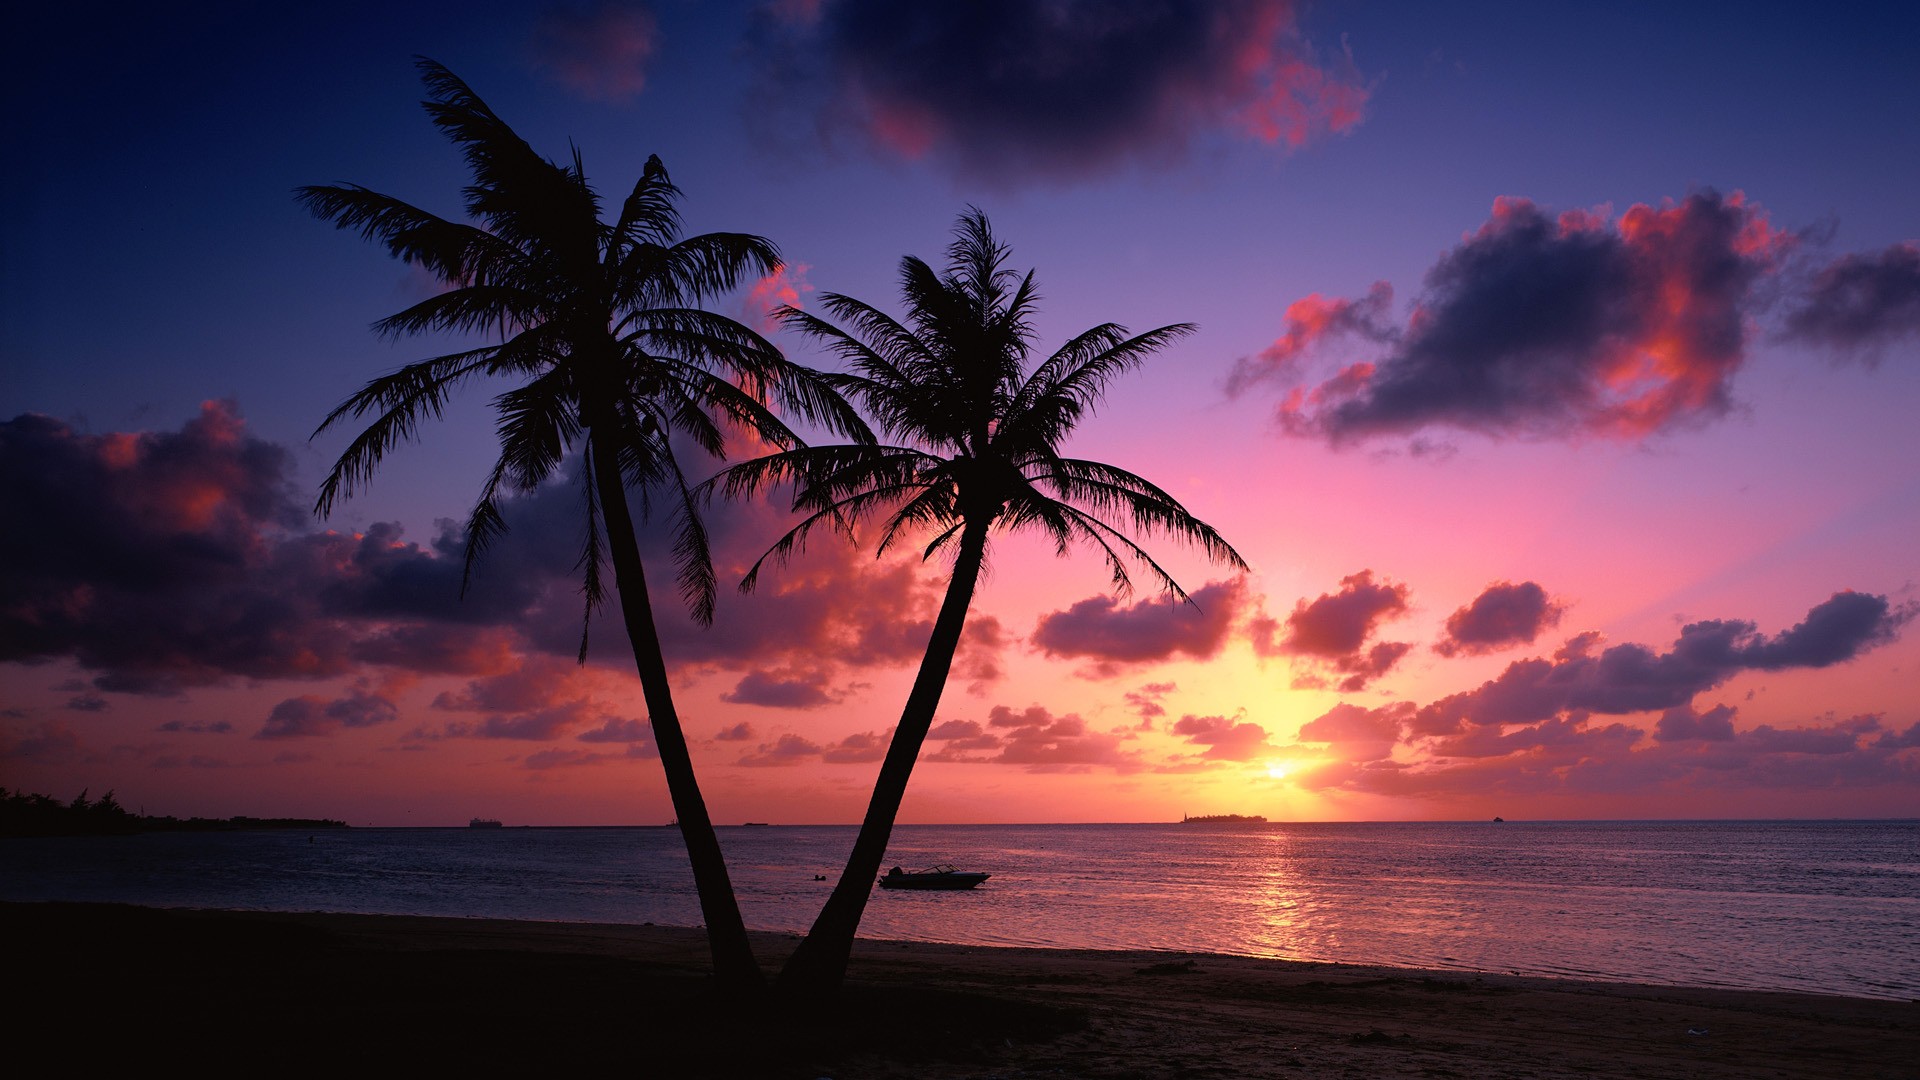 Beach Sunset With Palm Trees - wallpaper.